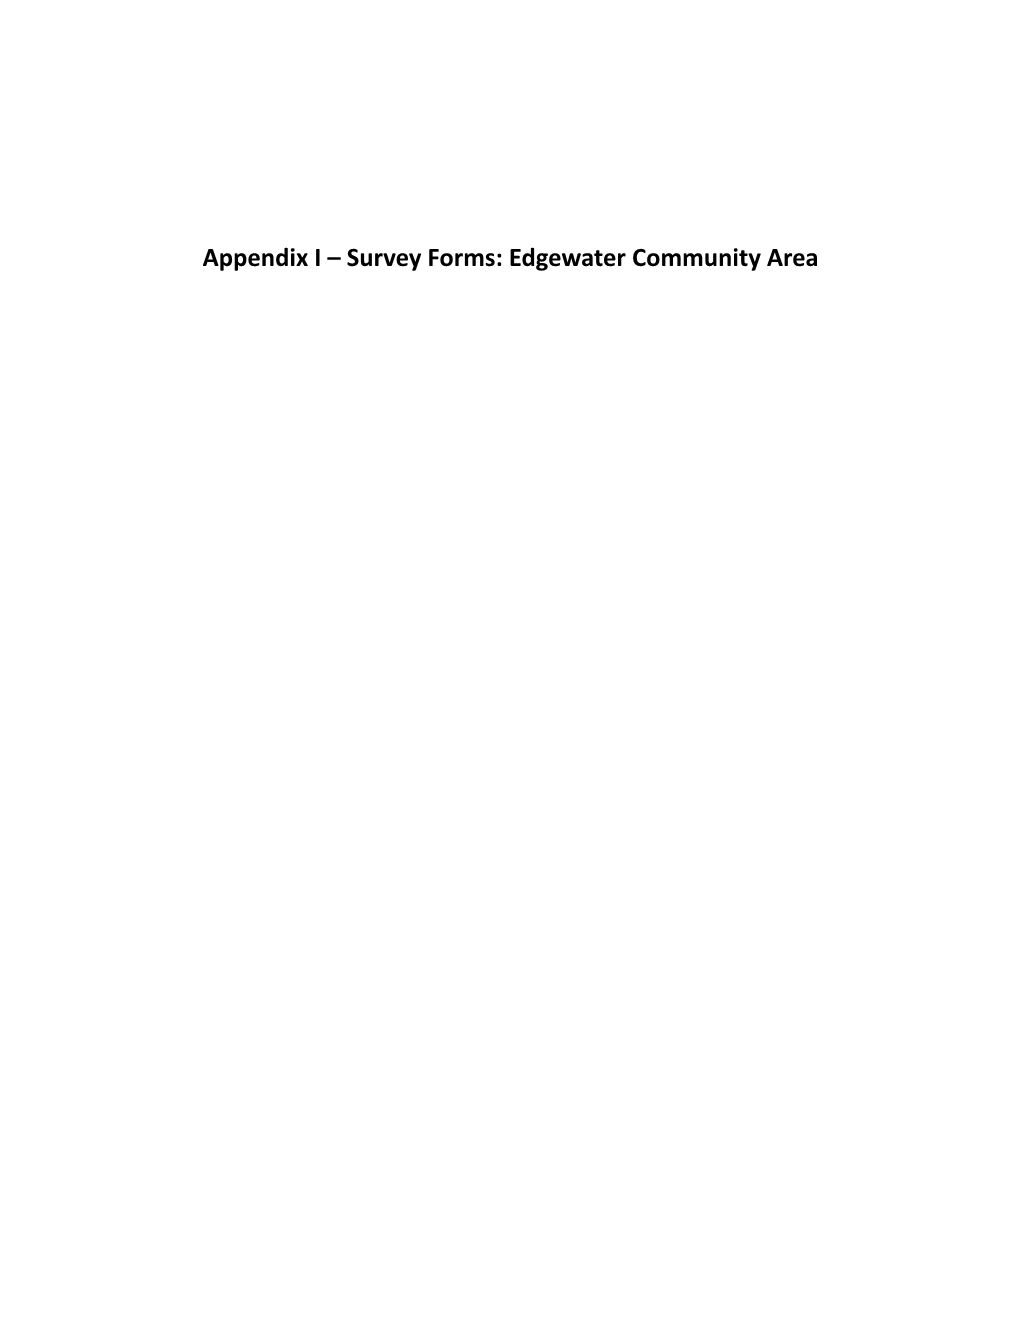 Edgewater Survey Forms